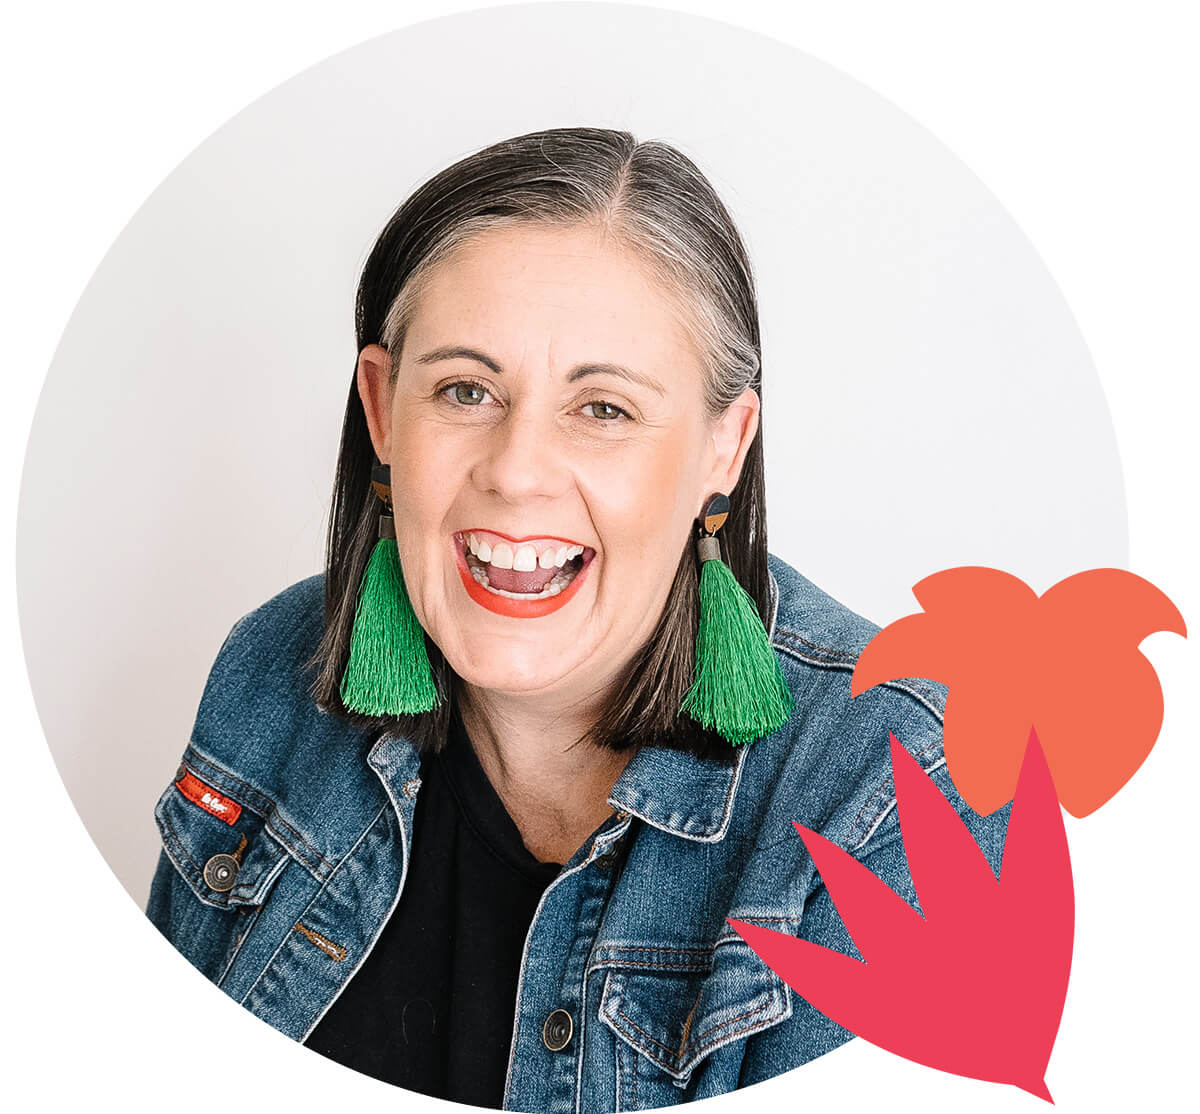 A woman with dark, grey streaked hair and long green earrings. She's wearing a denim jacket. She is Angela Pickett Sales page copywriter